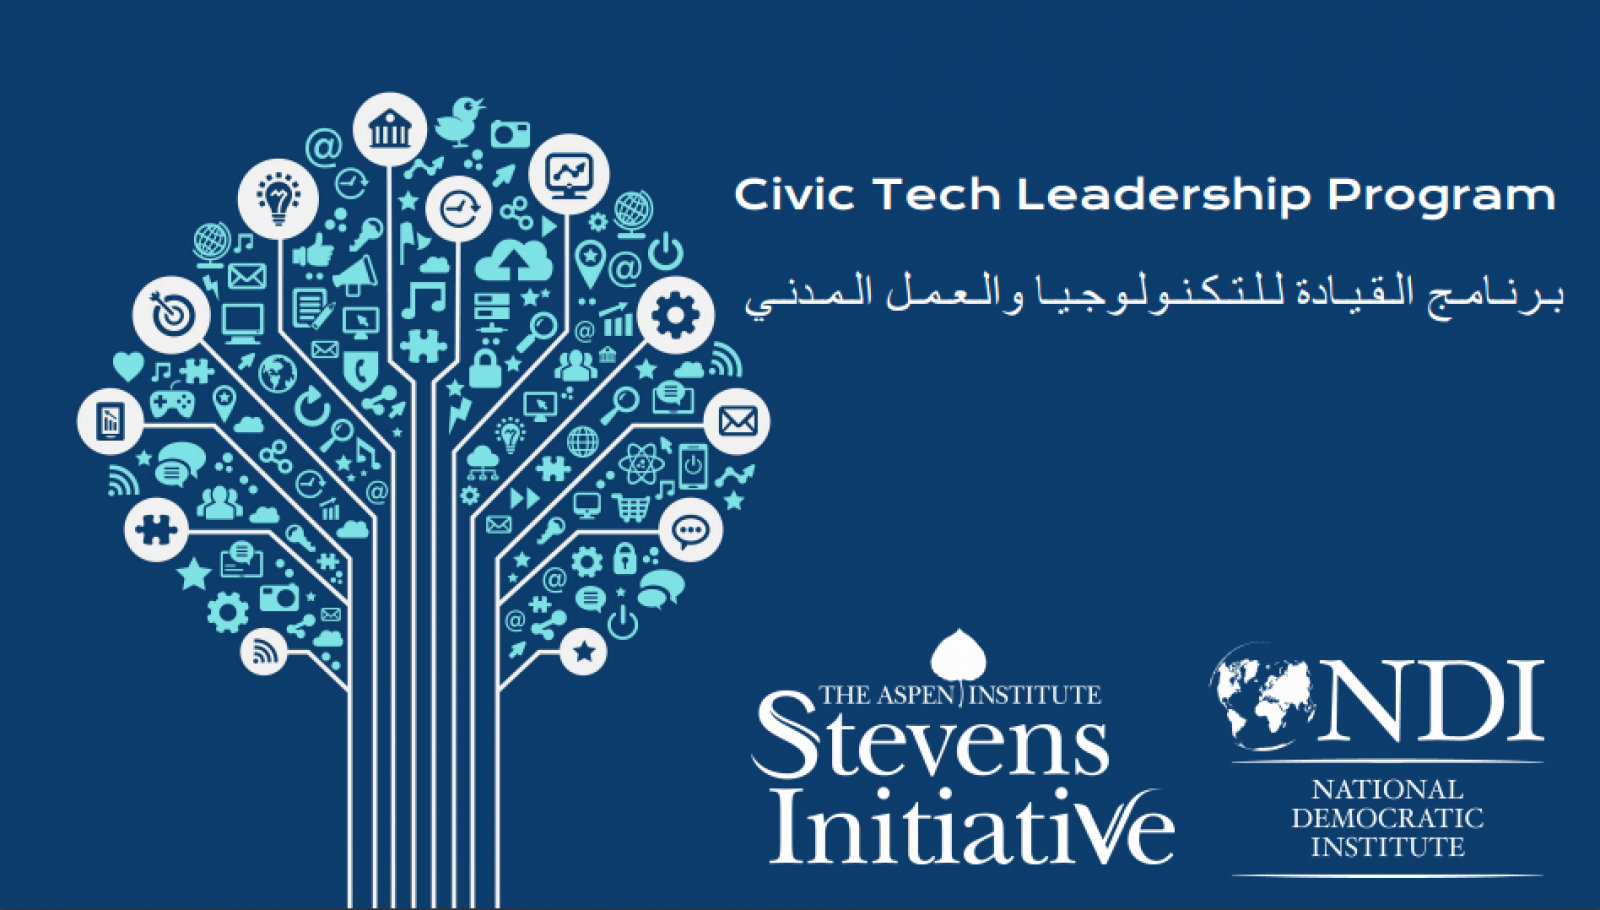 Young innovators in MENA, US pitch ‘civic tech’ ideas to improve their communities